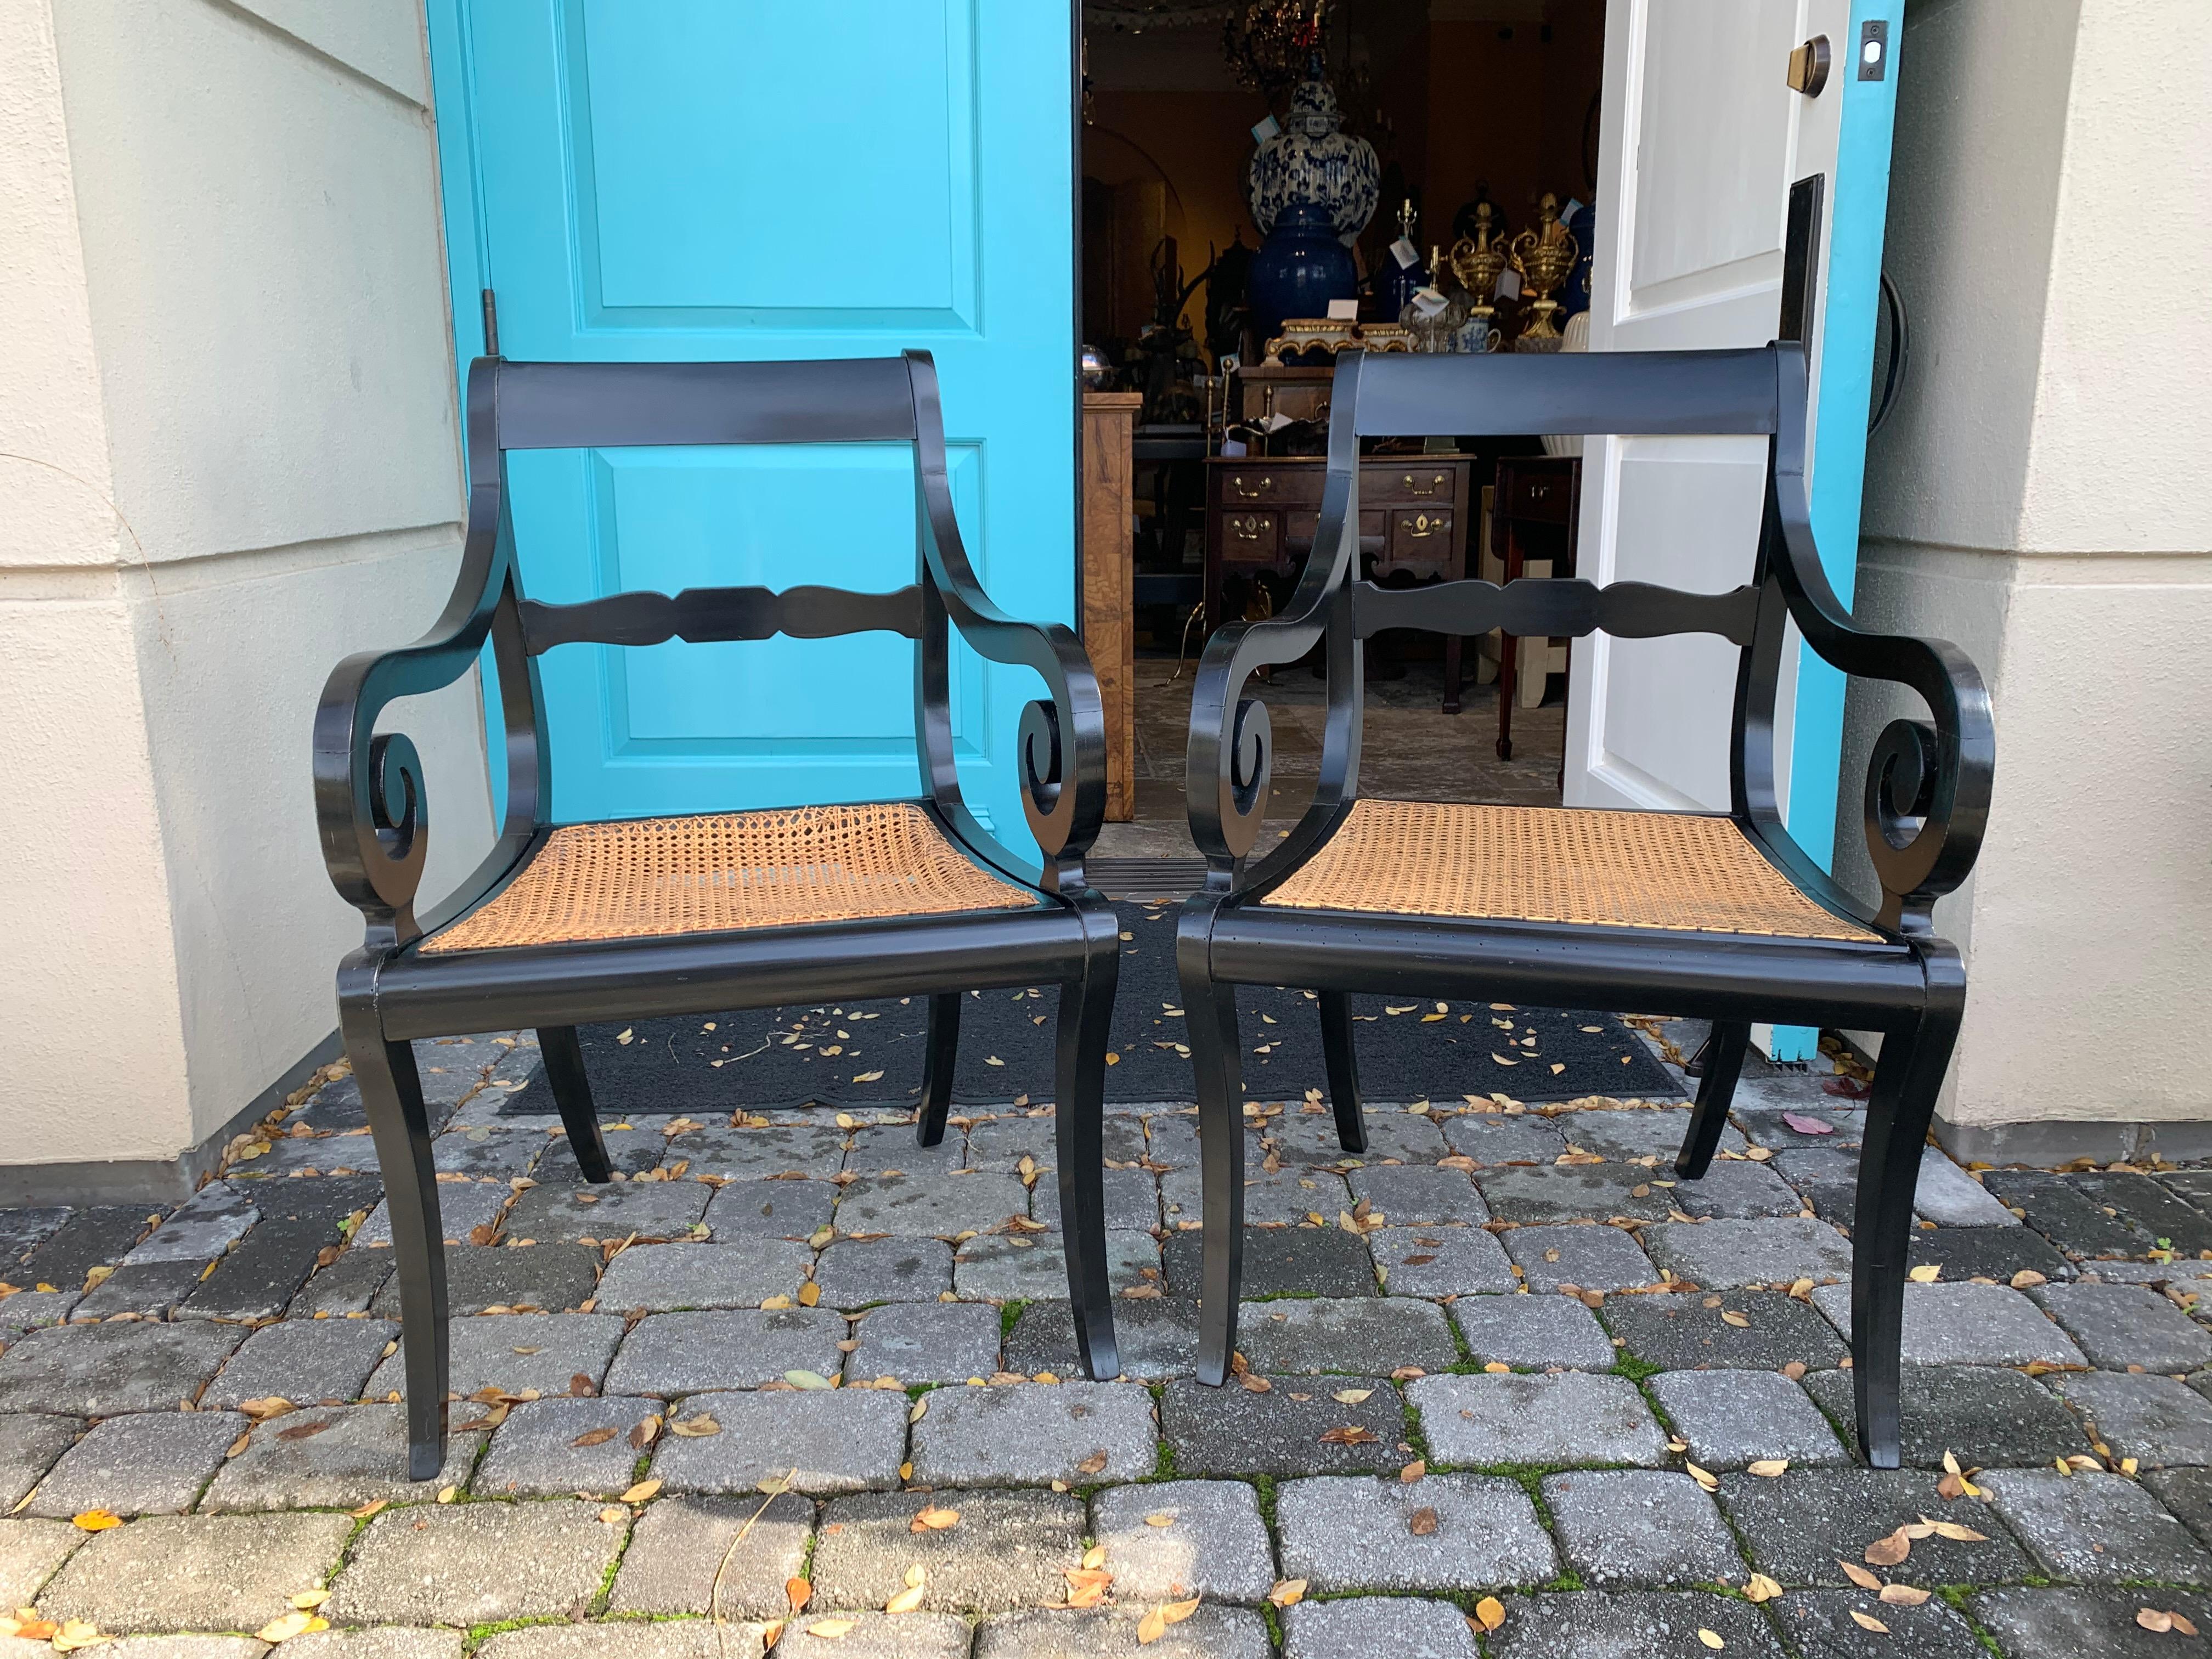 Pair of 20th century Regency style black armchairs with cane seats, circa 1900
large scale
Measures: 23